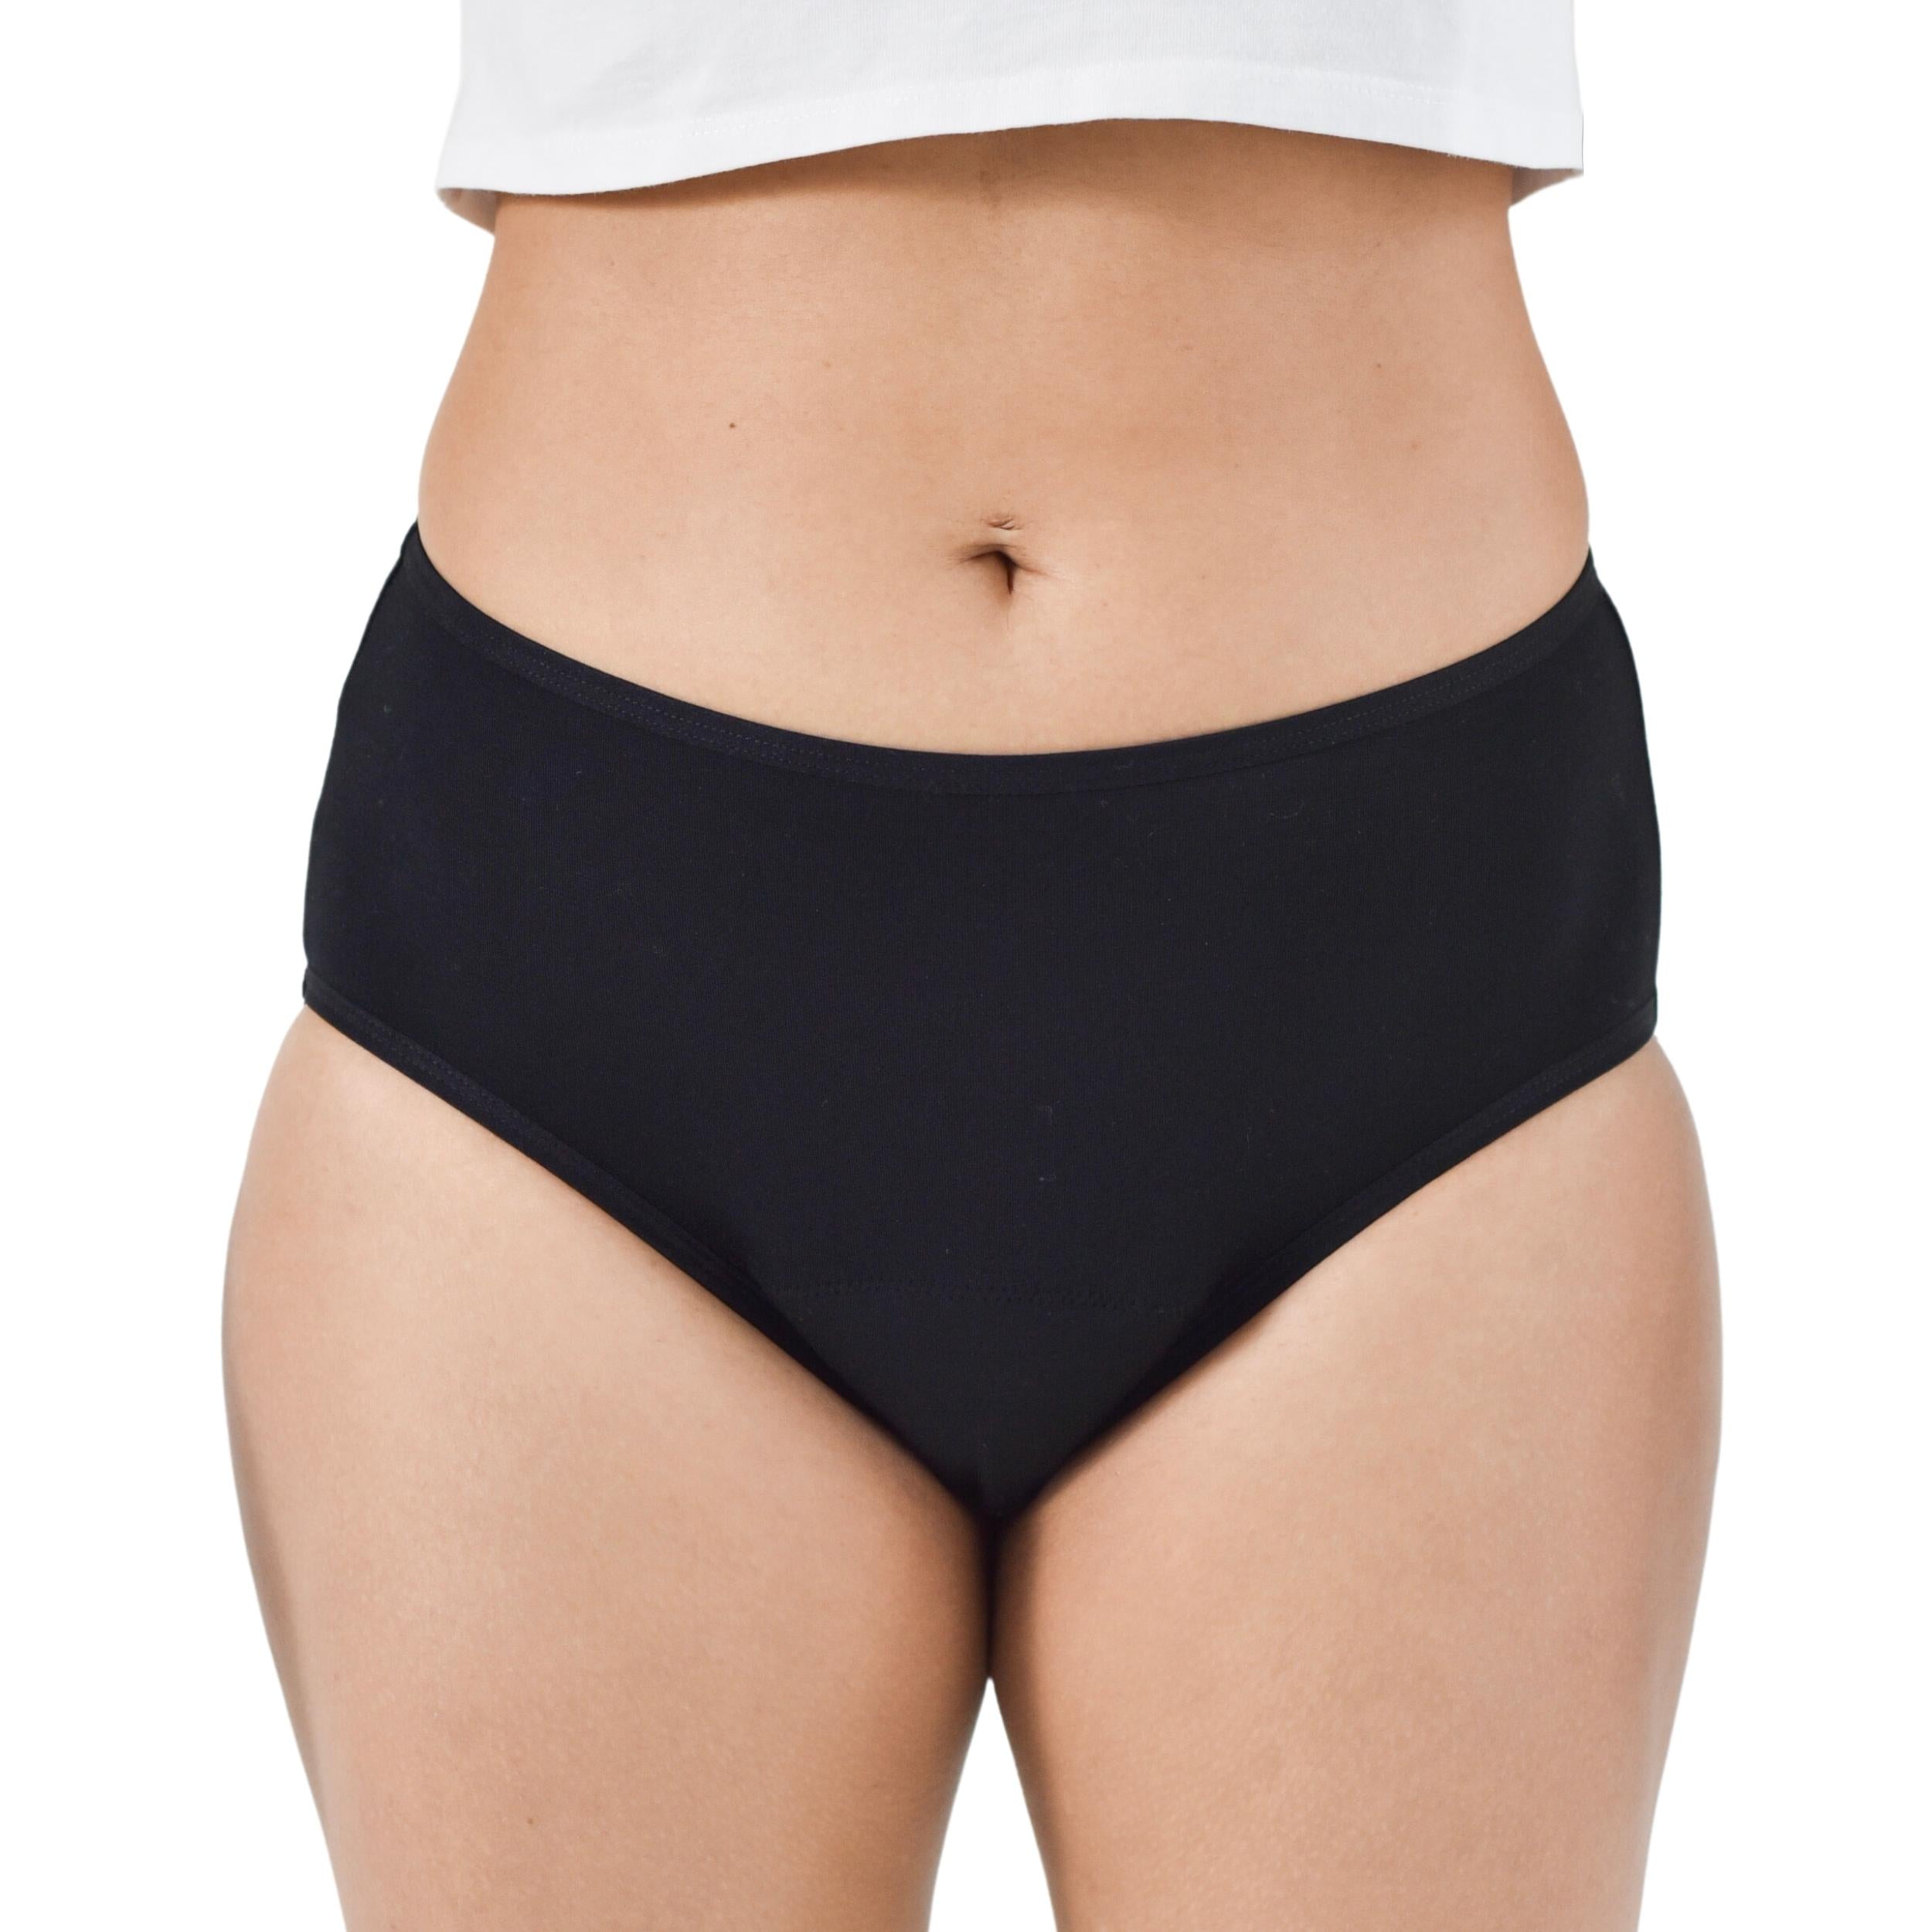 Introducing The Period Panty  More comfort, less worry. Watch